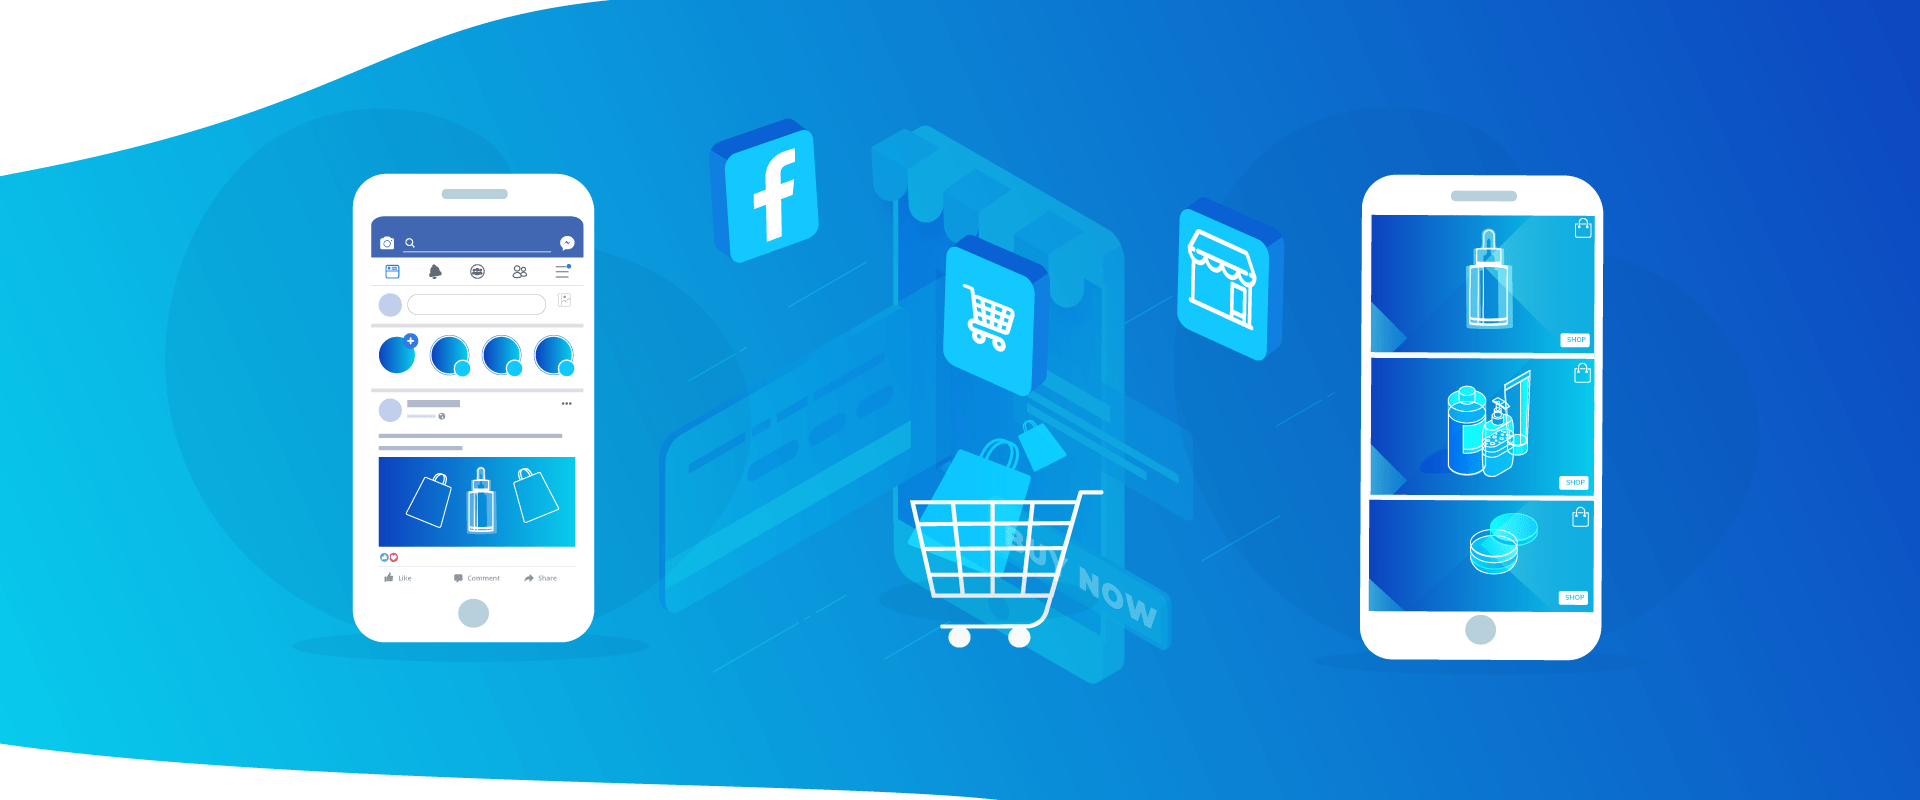 The rise in social commerce